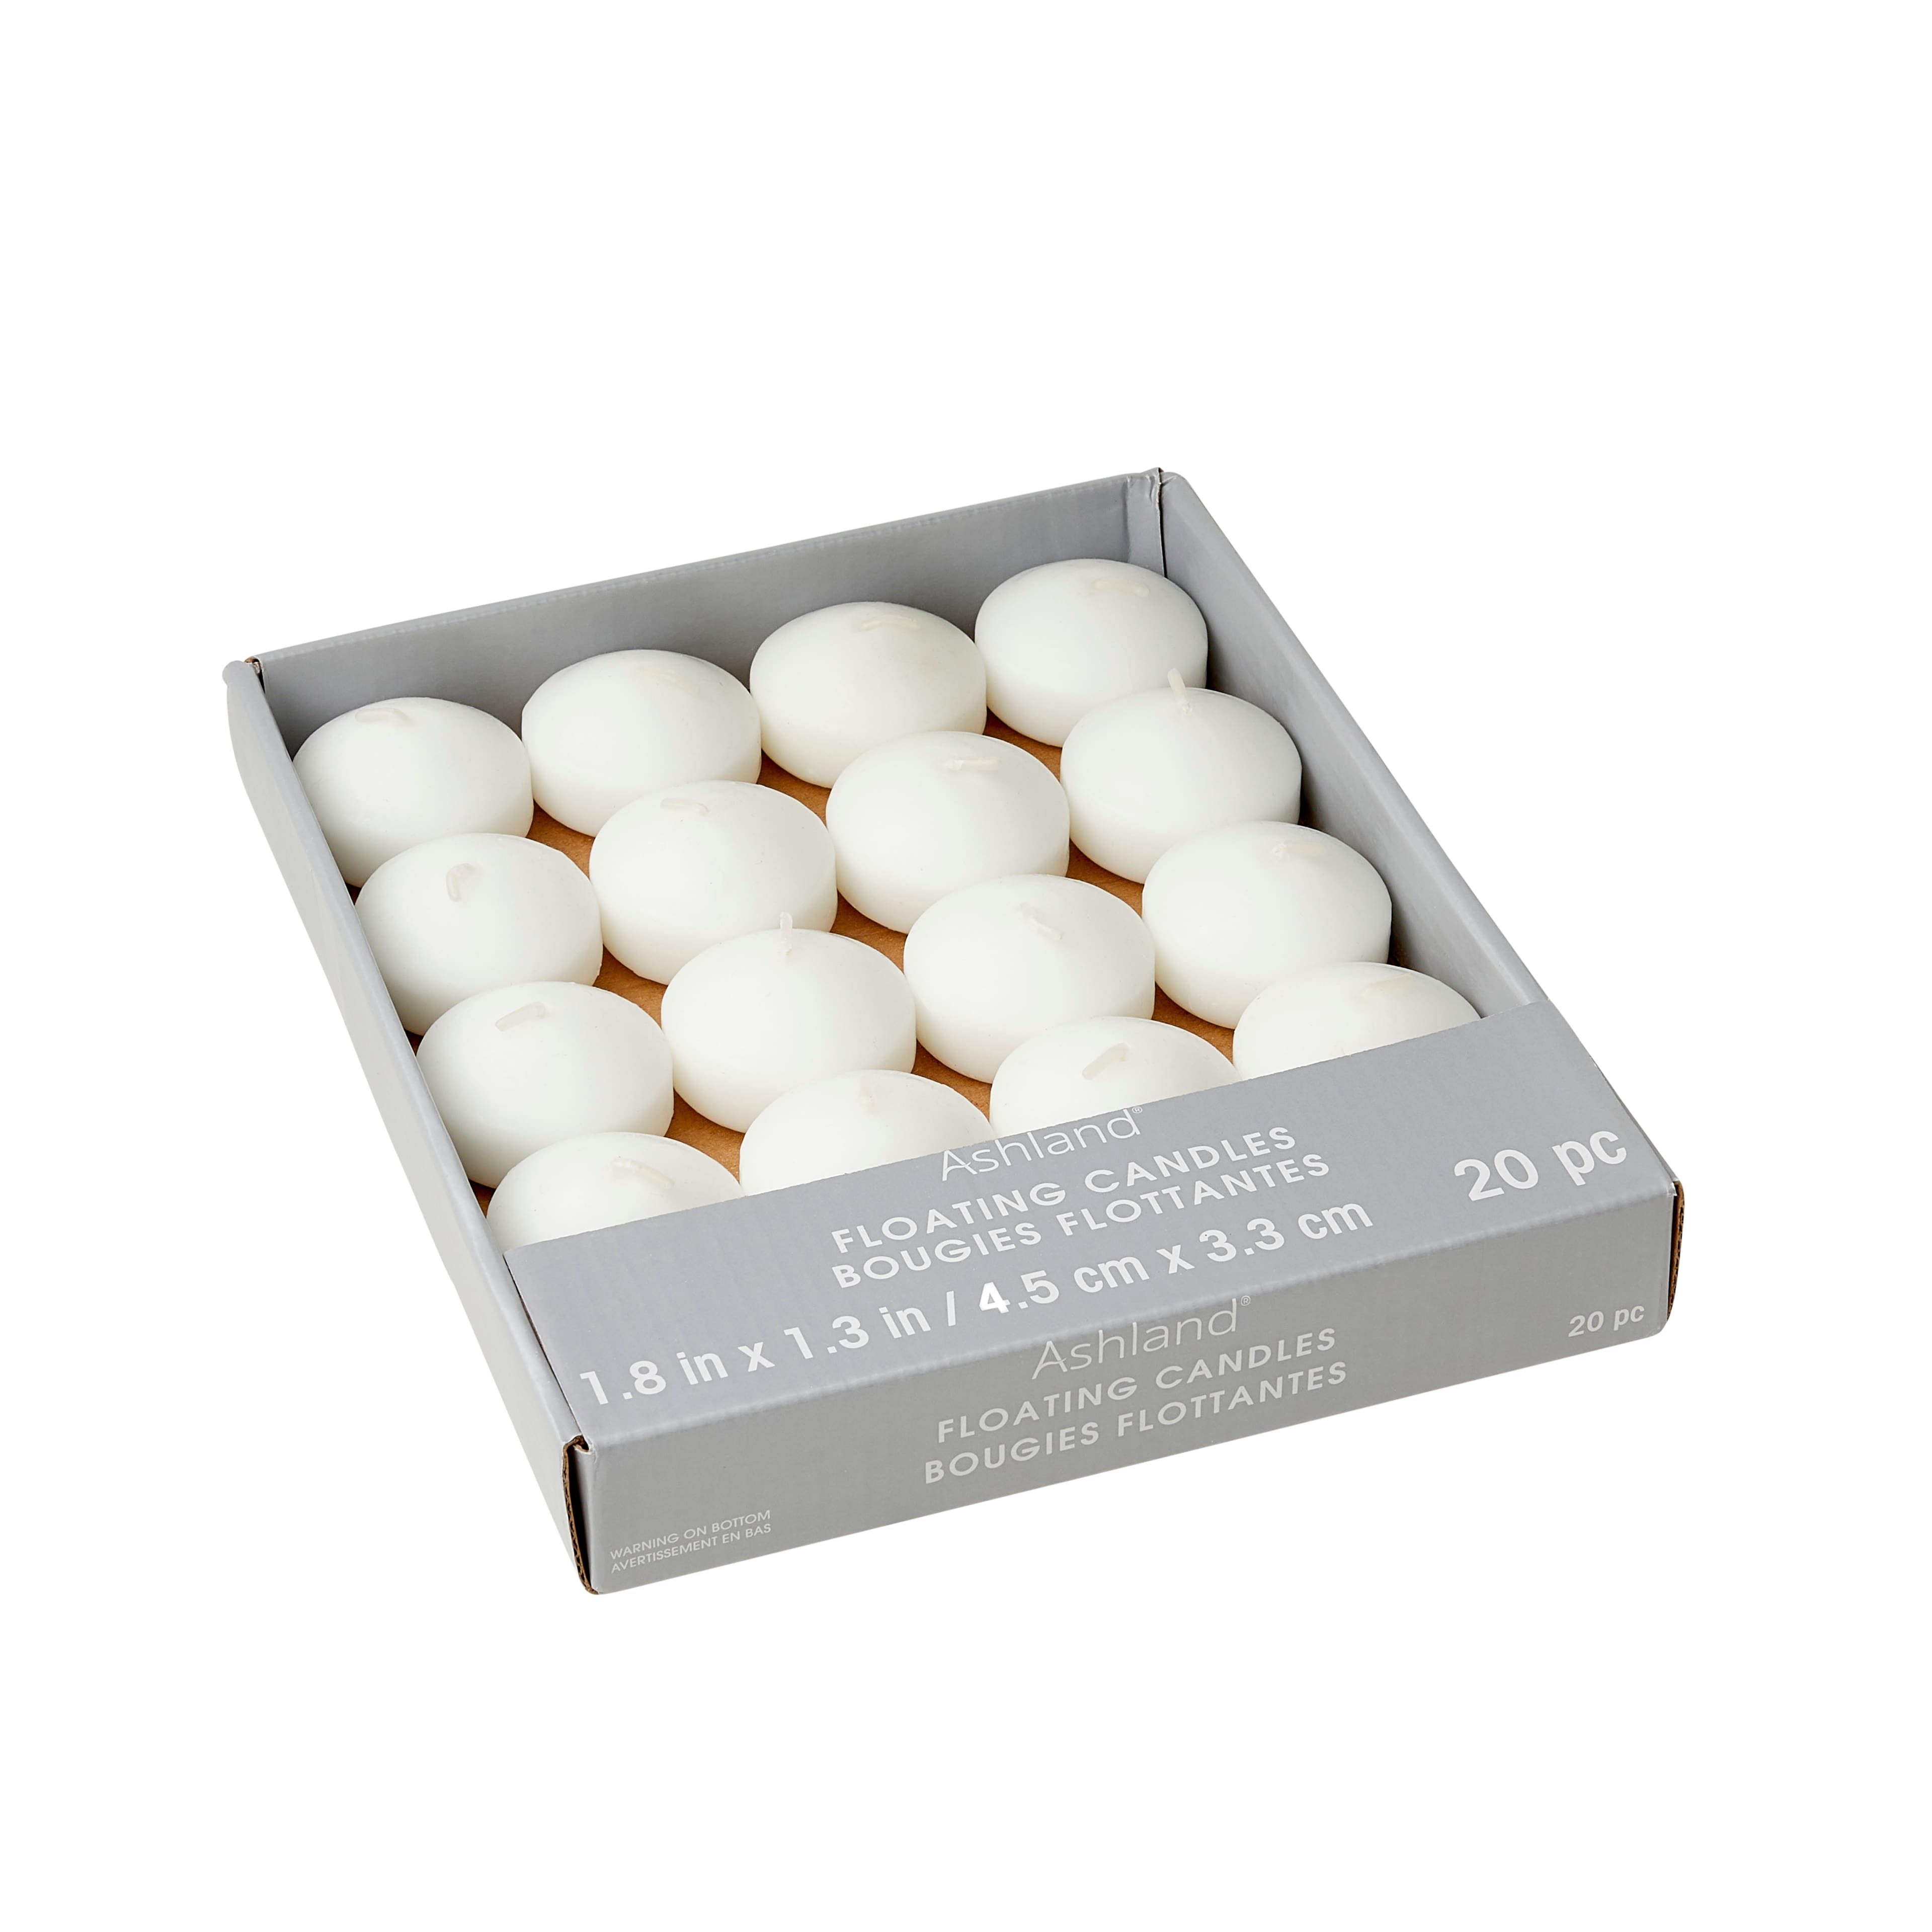 12 Packs: 40 ct. (240 total) Basic Elements&#x2122; White Floating Candles Value Pack by Ashland&#xAE;